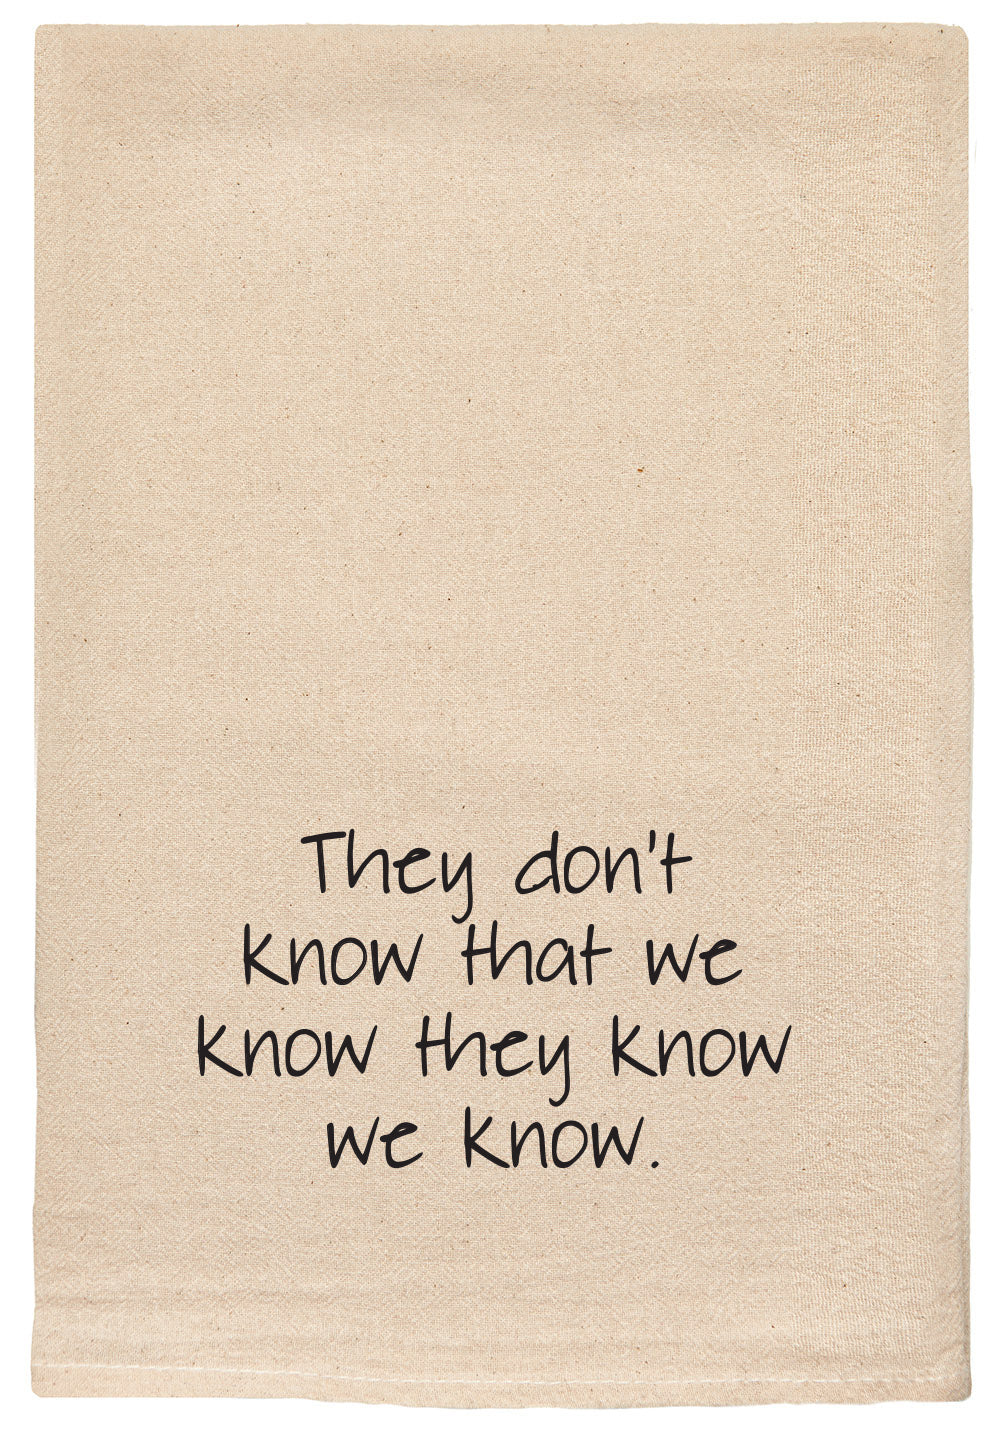 They don't know we know they know we know